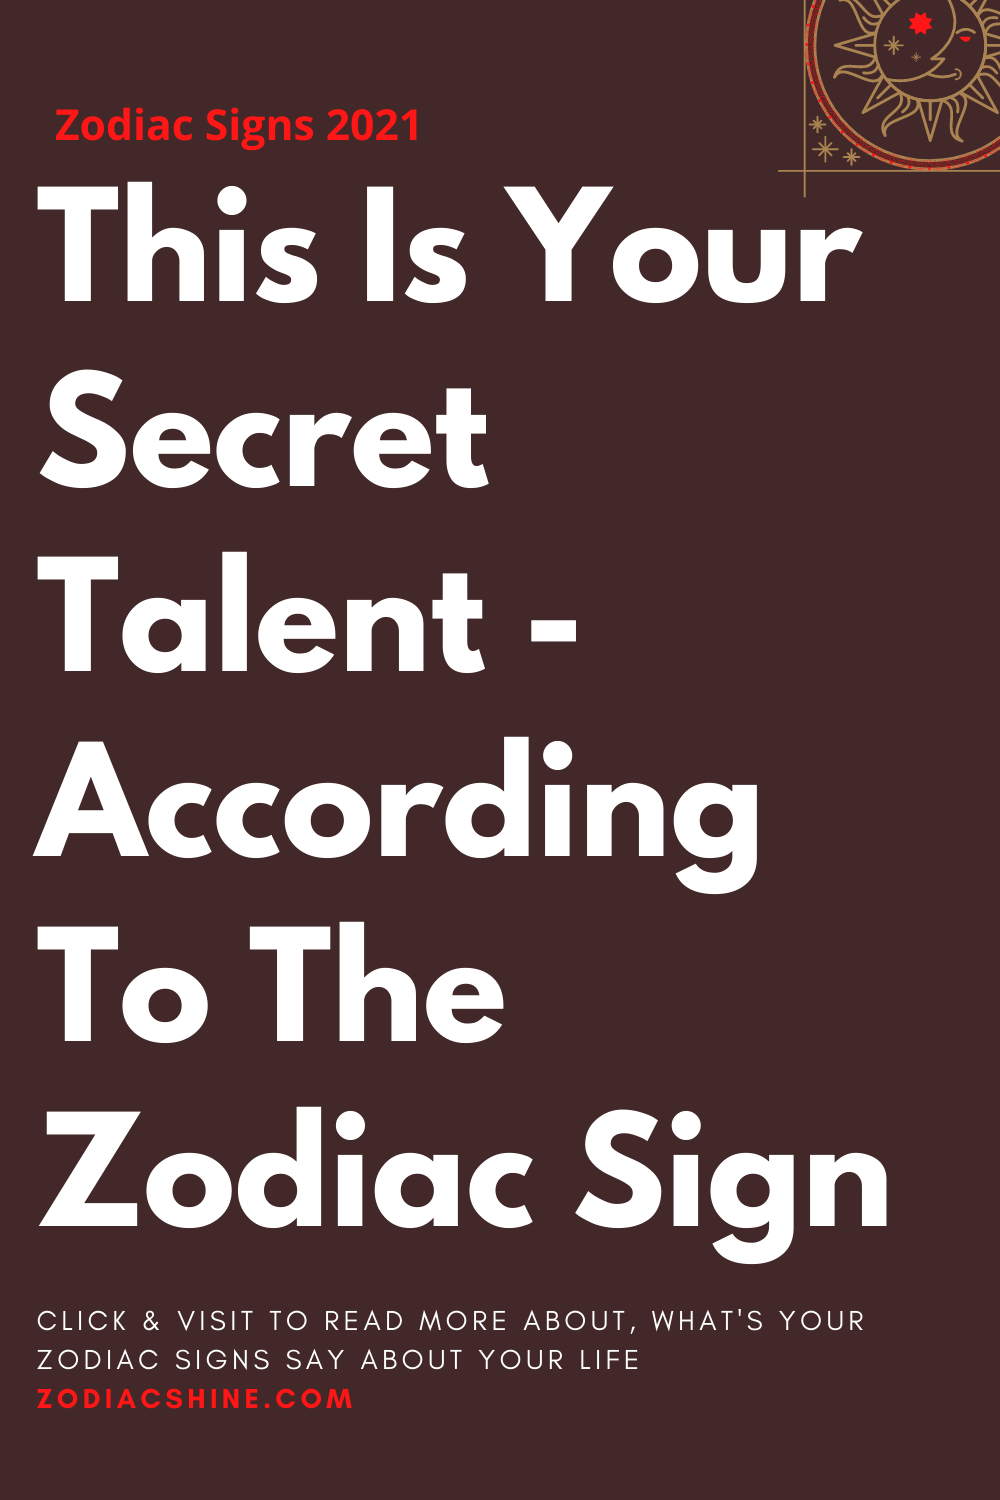 This Is Your Secret Talent - According To The Zodiac Sign